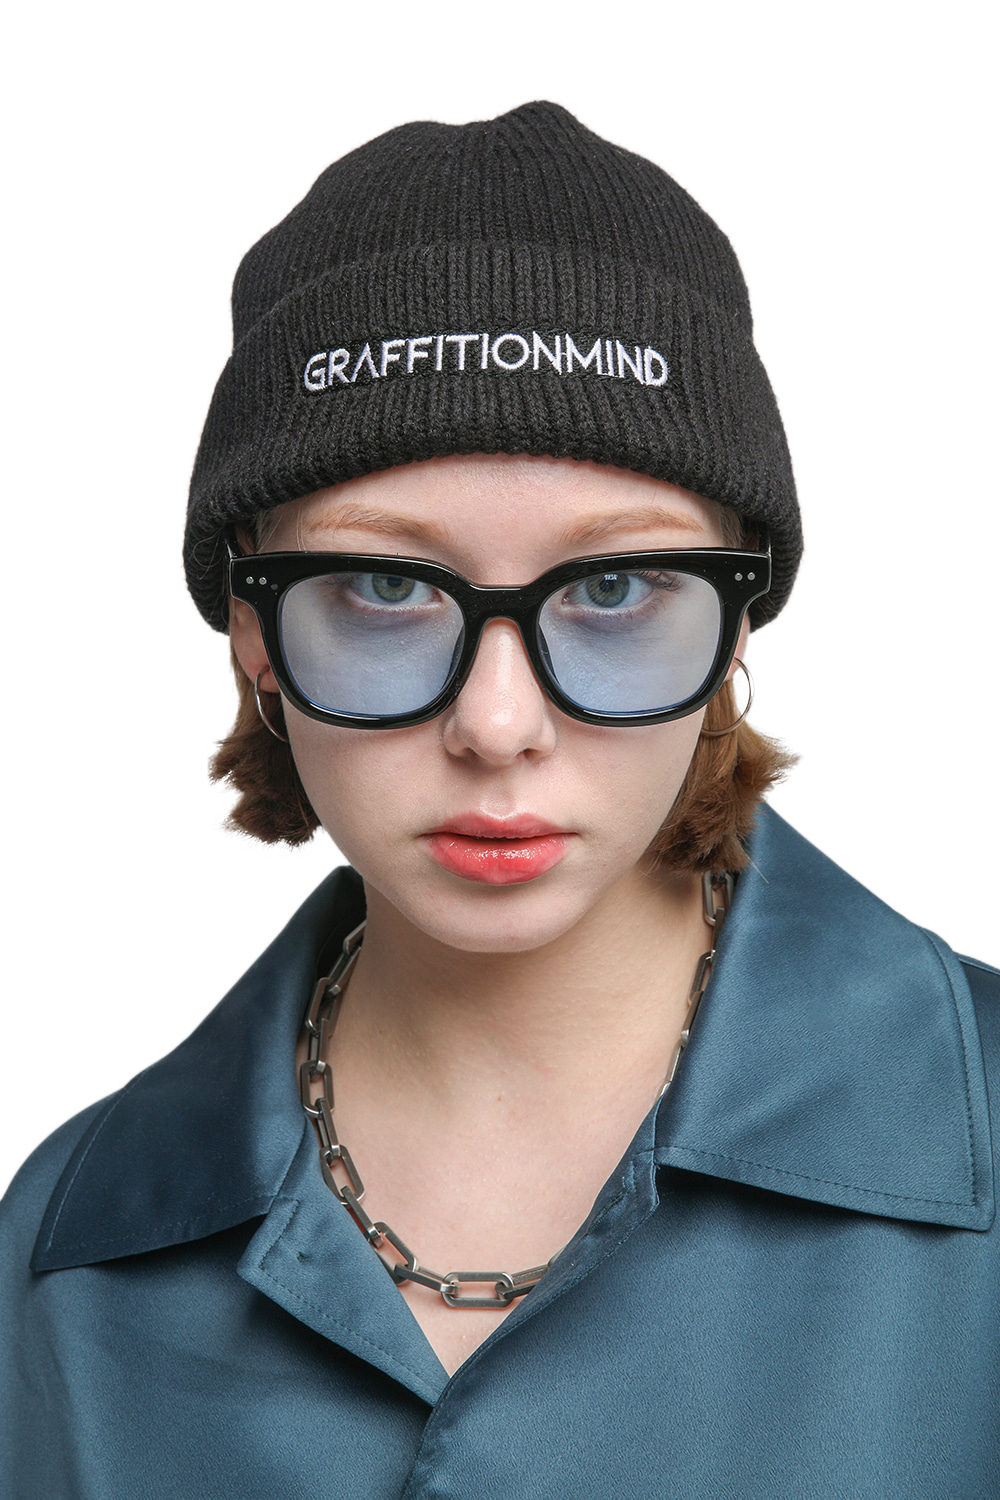 Embroidered Beanie (Black)GRAFFITIONMIND